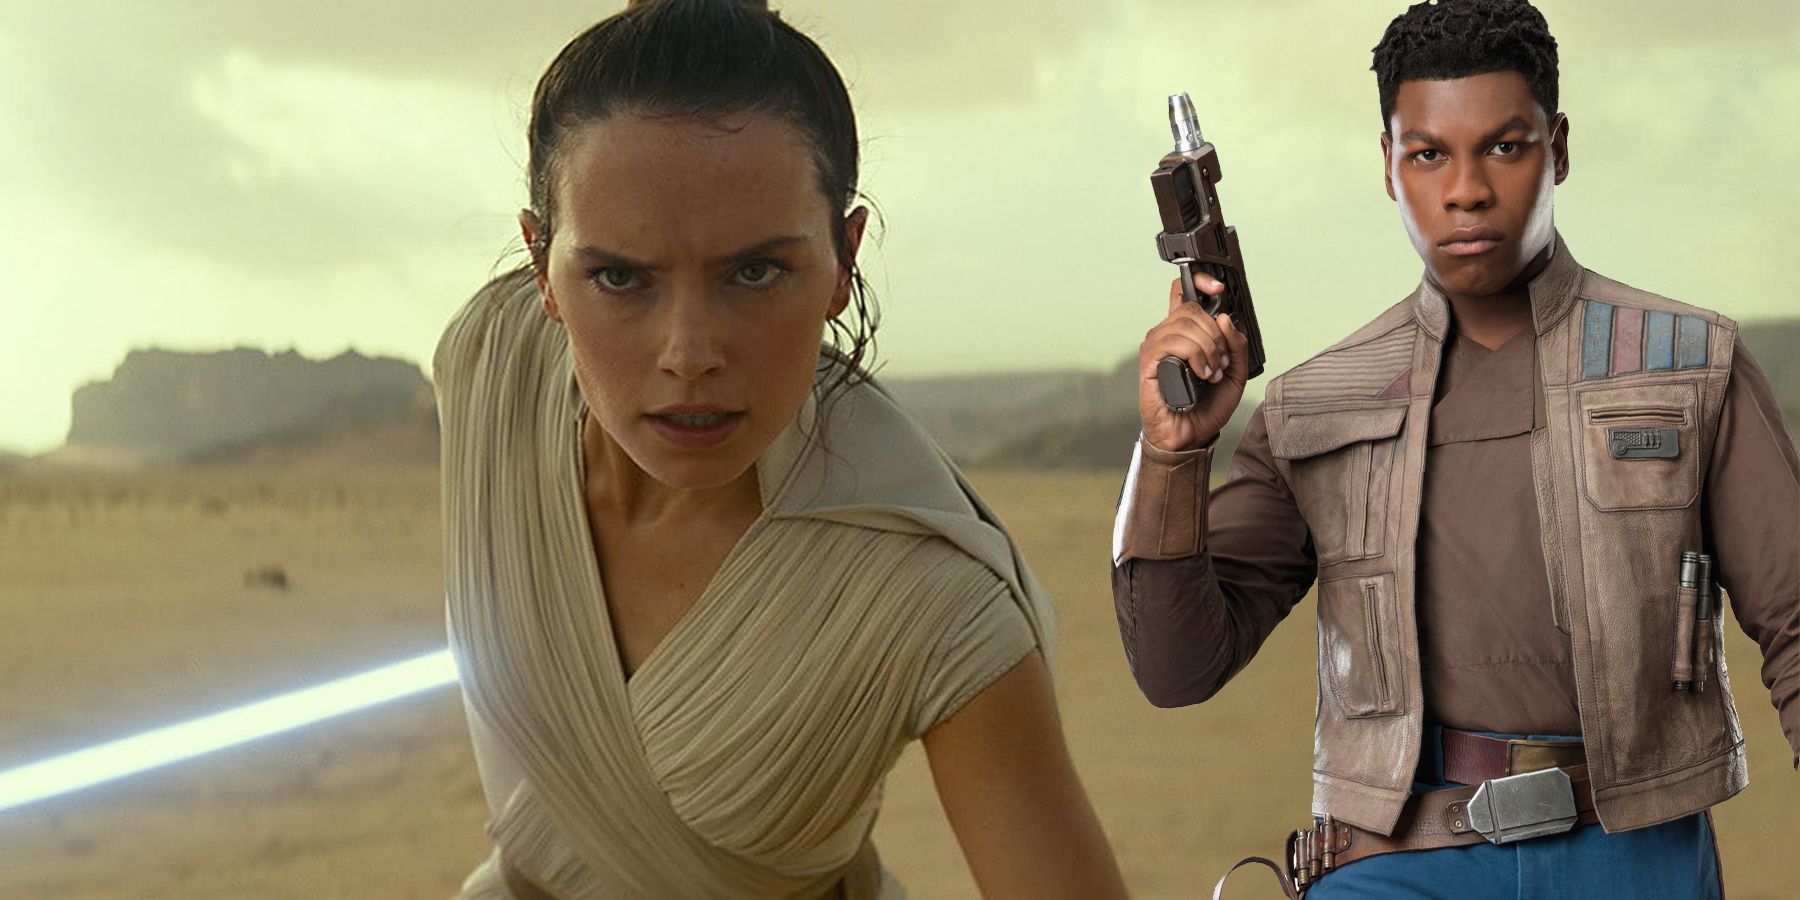 Rey and Finn from the Star Wars sequel trilogy.